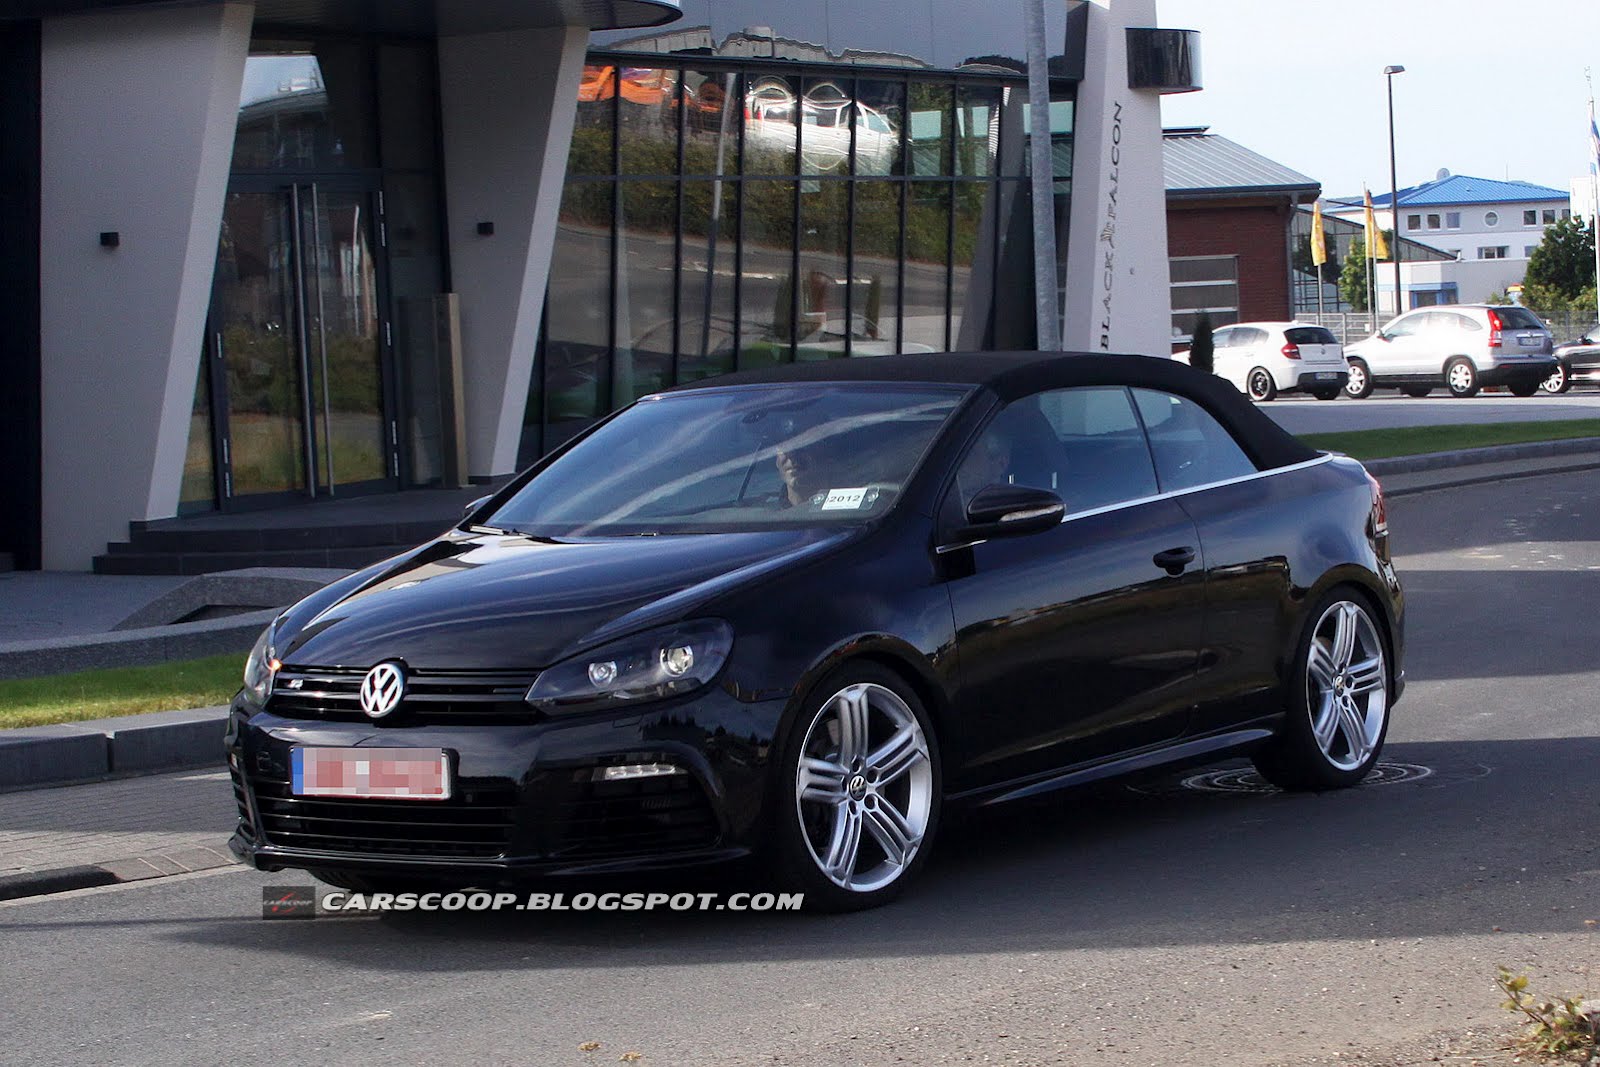 Spy Shots: 2013 Volkswagen Golf R Cabriolet Breaks Cover Without Any Camo Carscoops